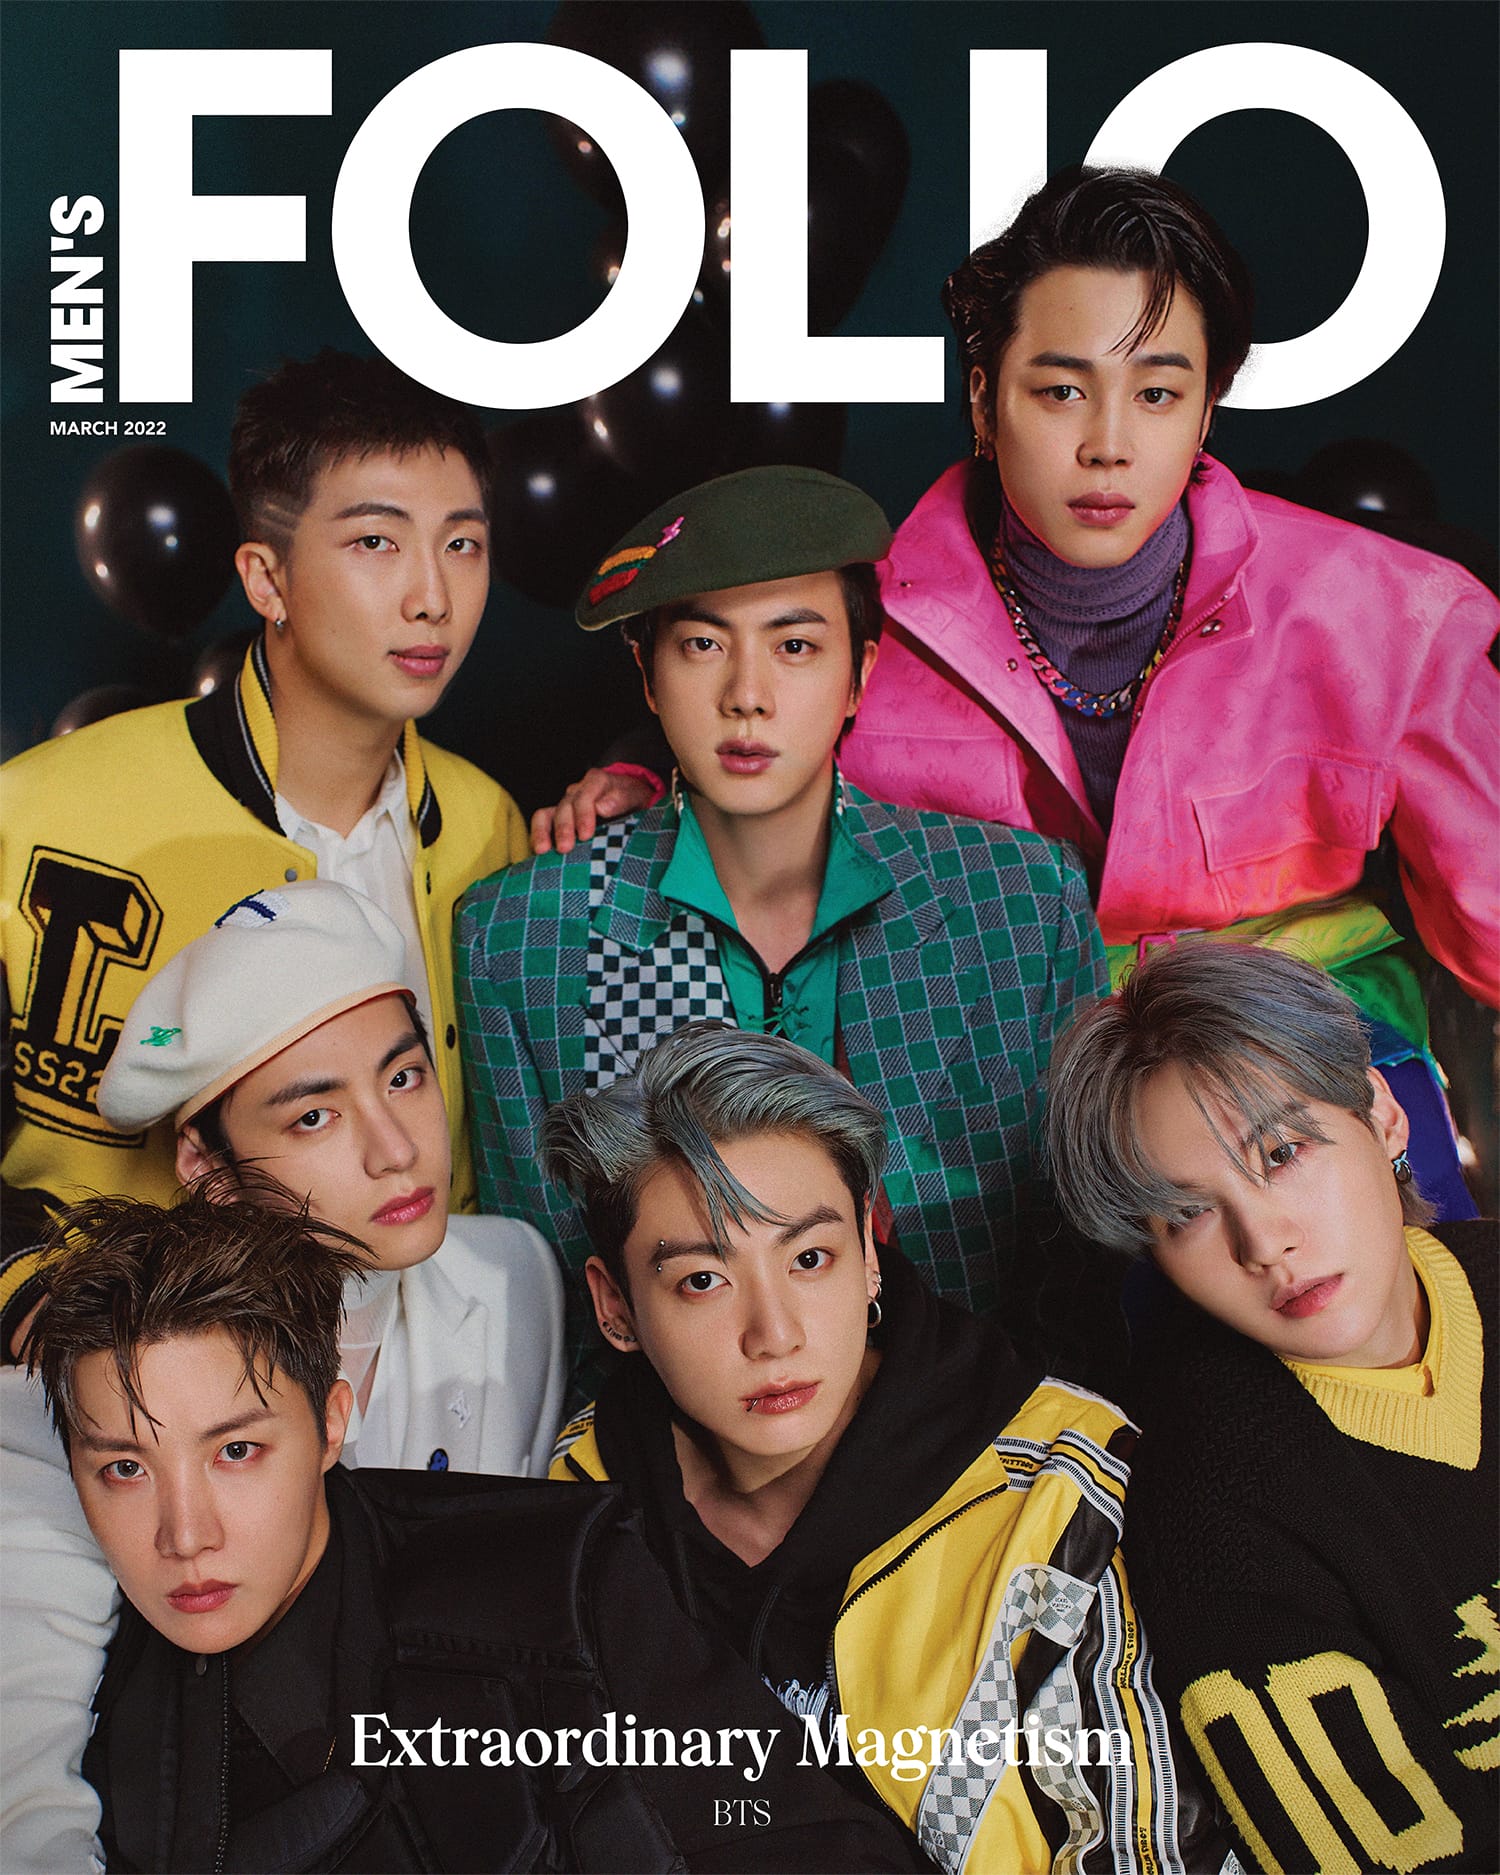 The Boys of BTS Light Up Our March 2022 Issue - Men's Folio